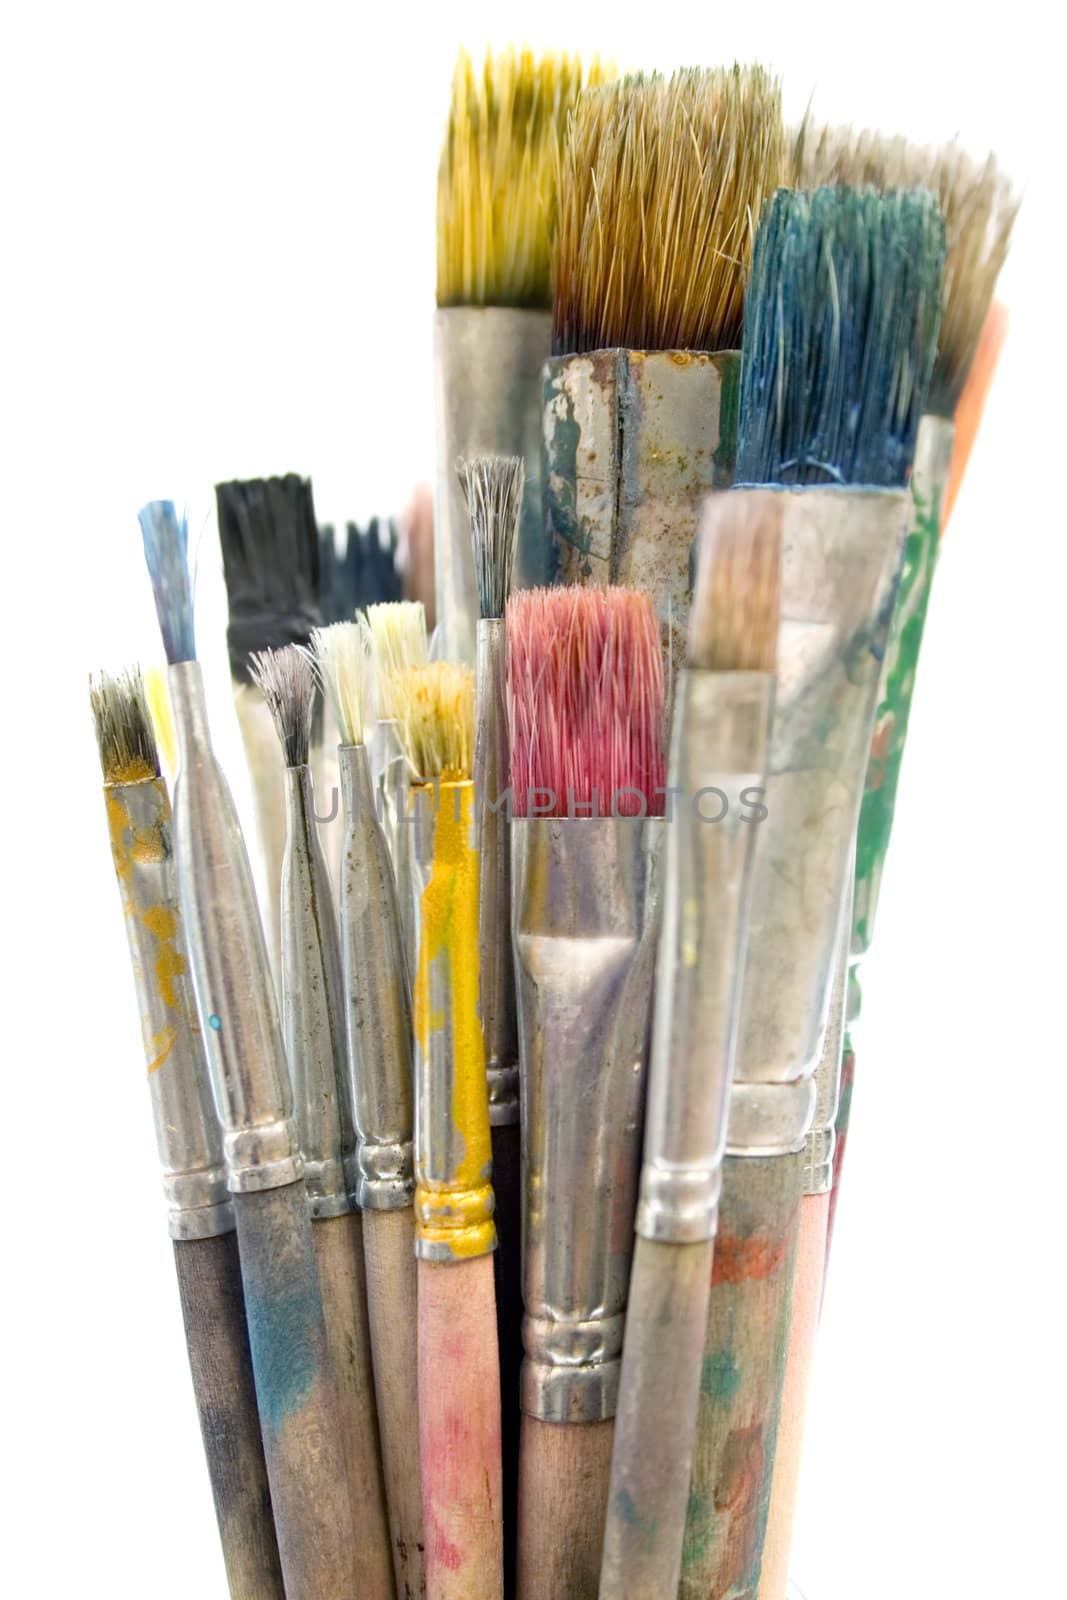 Dirty Paintbrushes by winterling